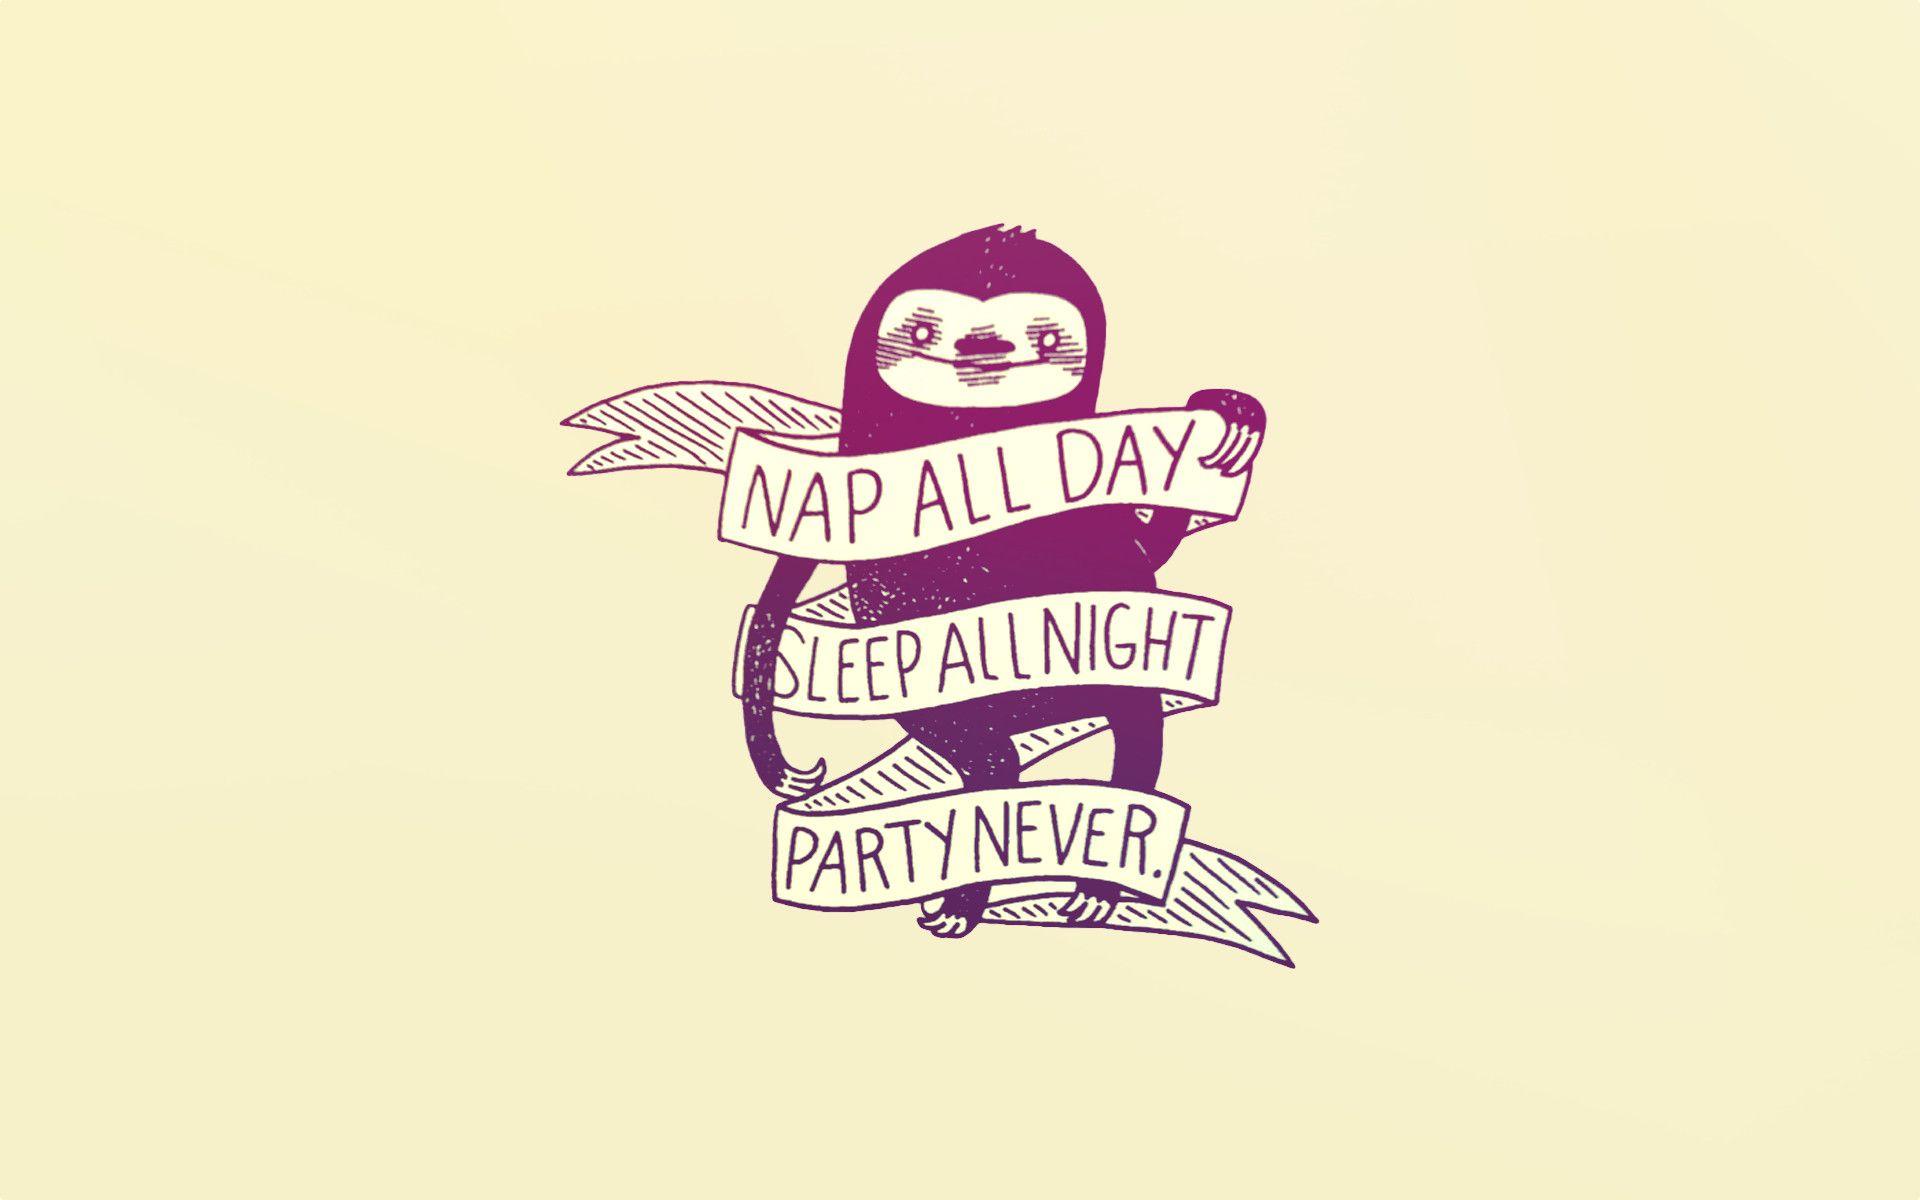 Made a wallpaper out of Nap all day sloth. wallpaper